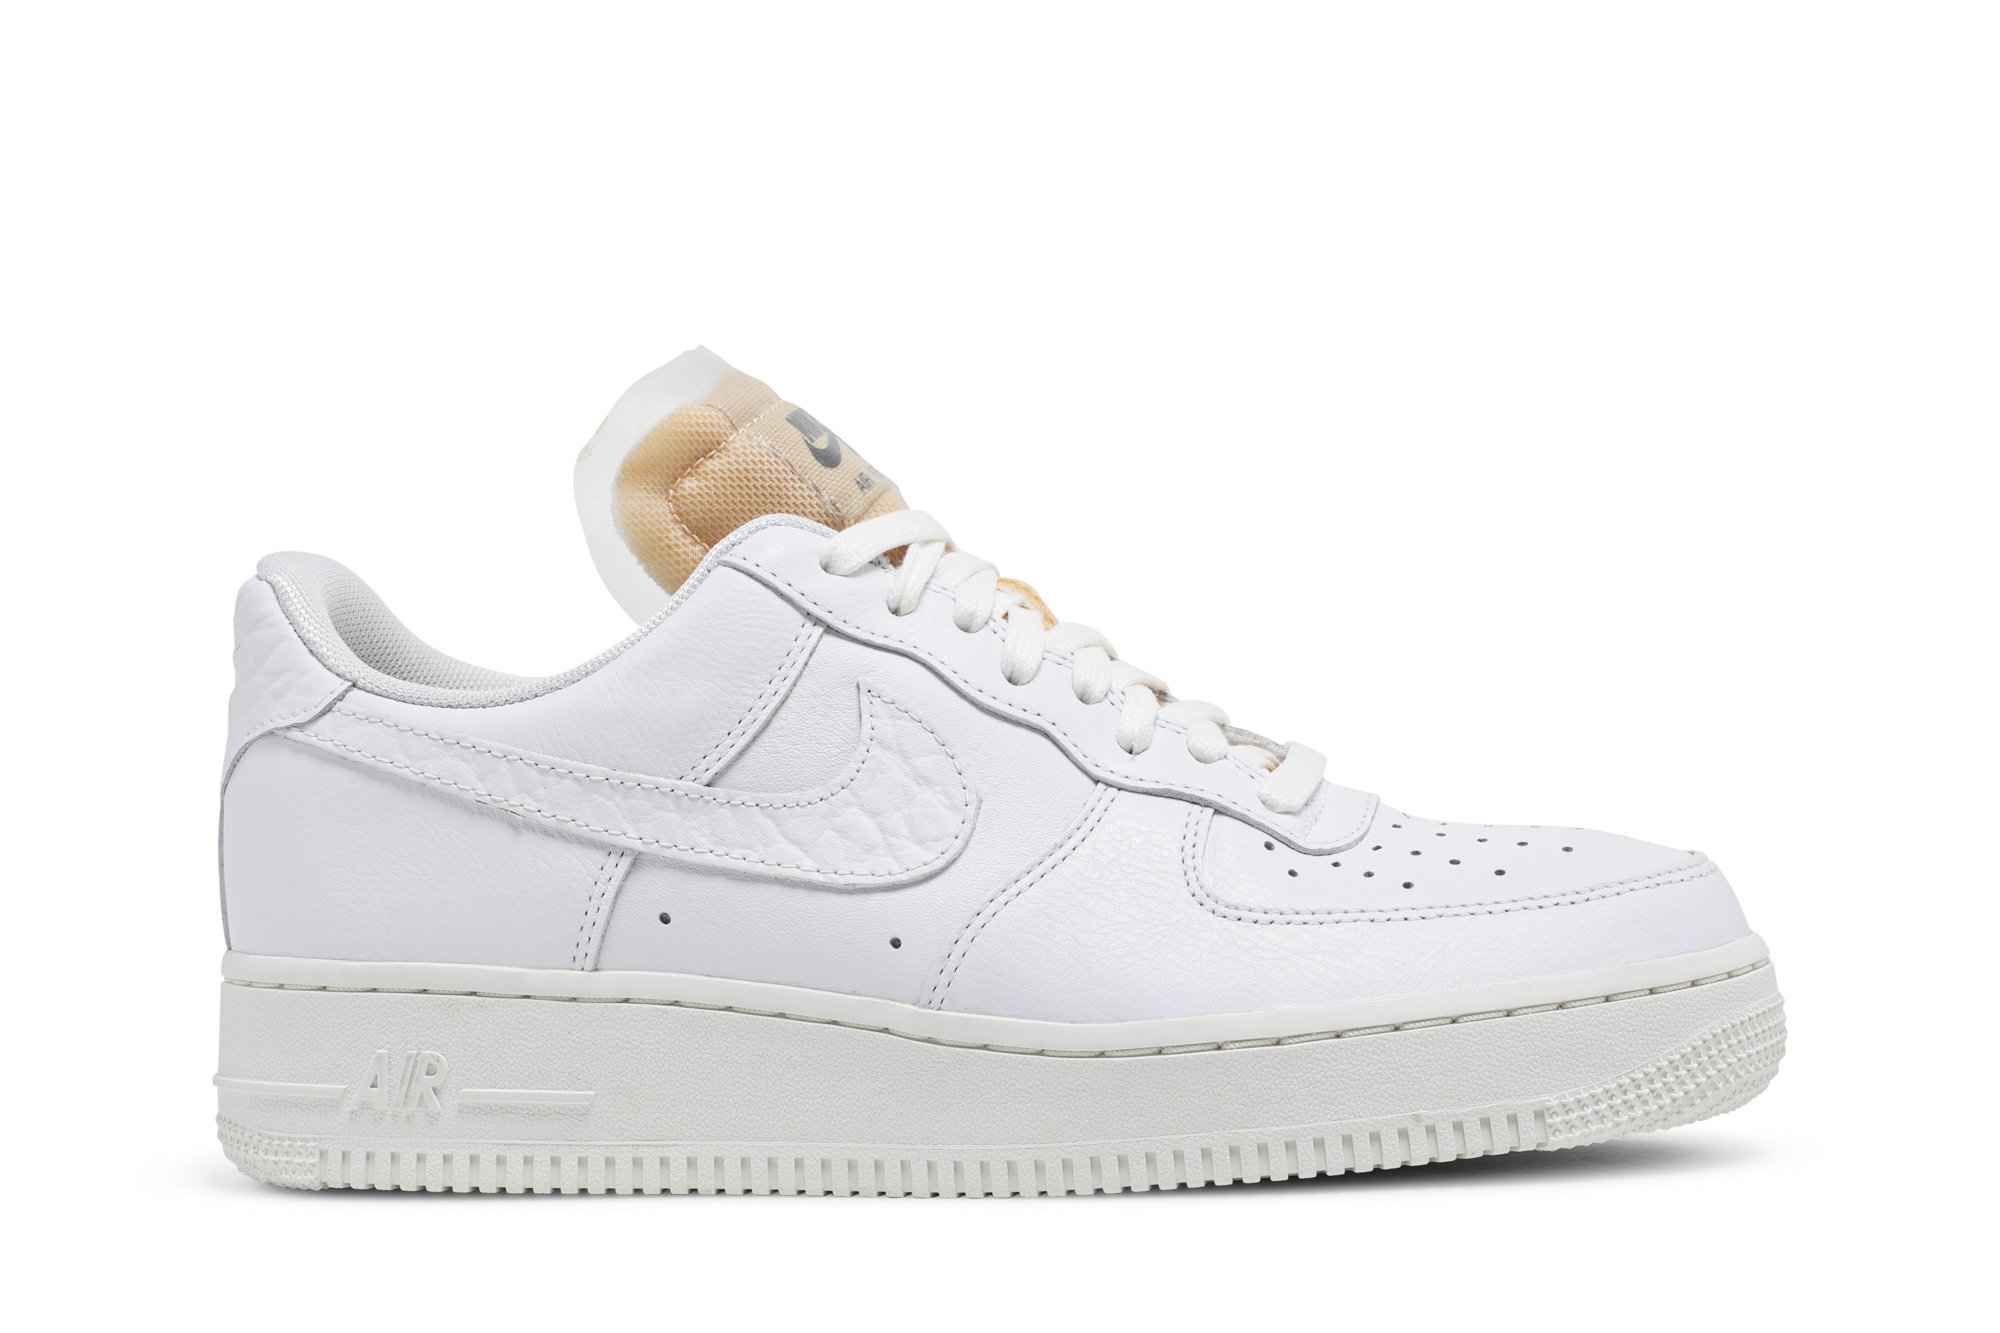 Buy Wmns Air Force 1 Low '07 LX 'Bling' - CZ8101 100 | GOAT